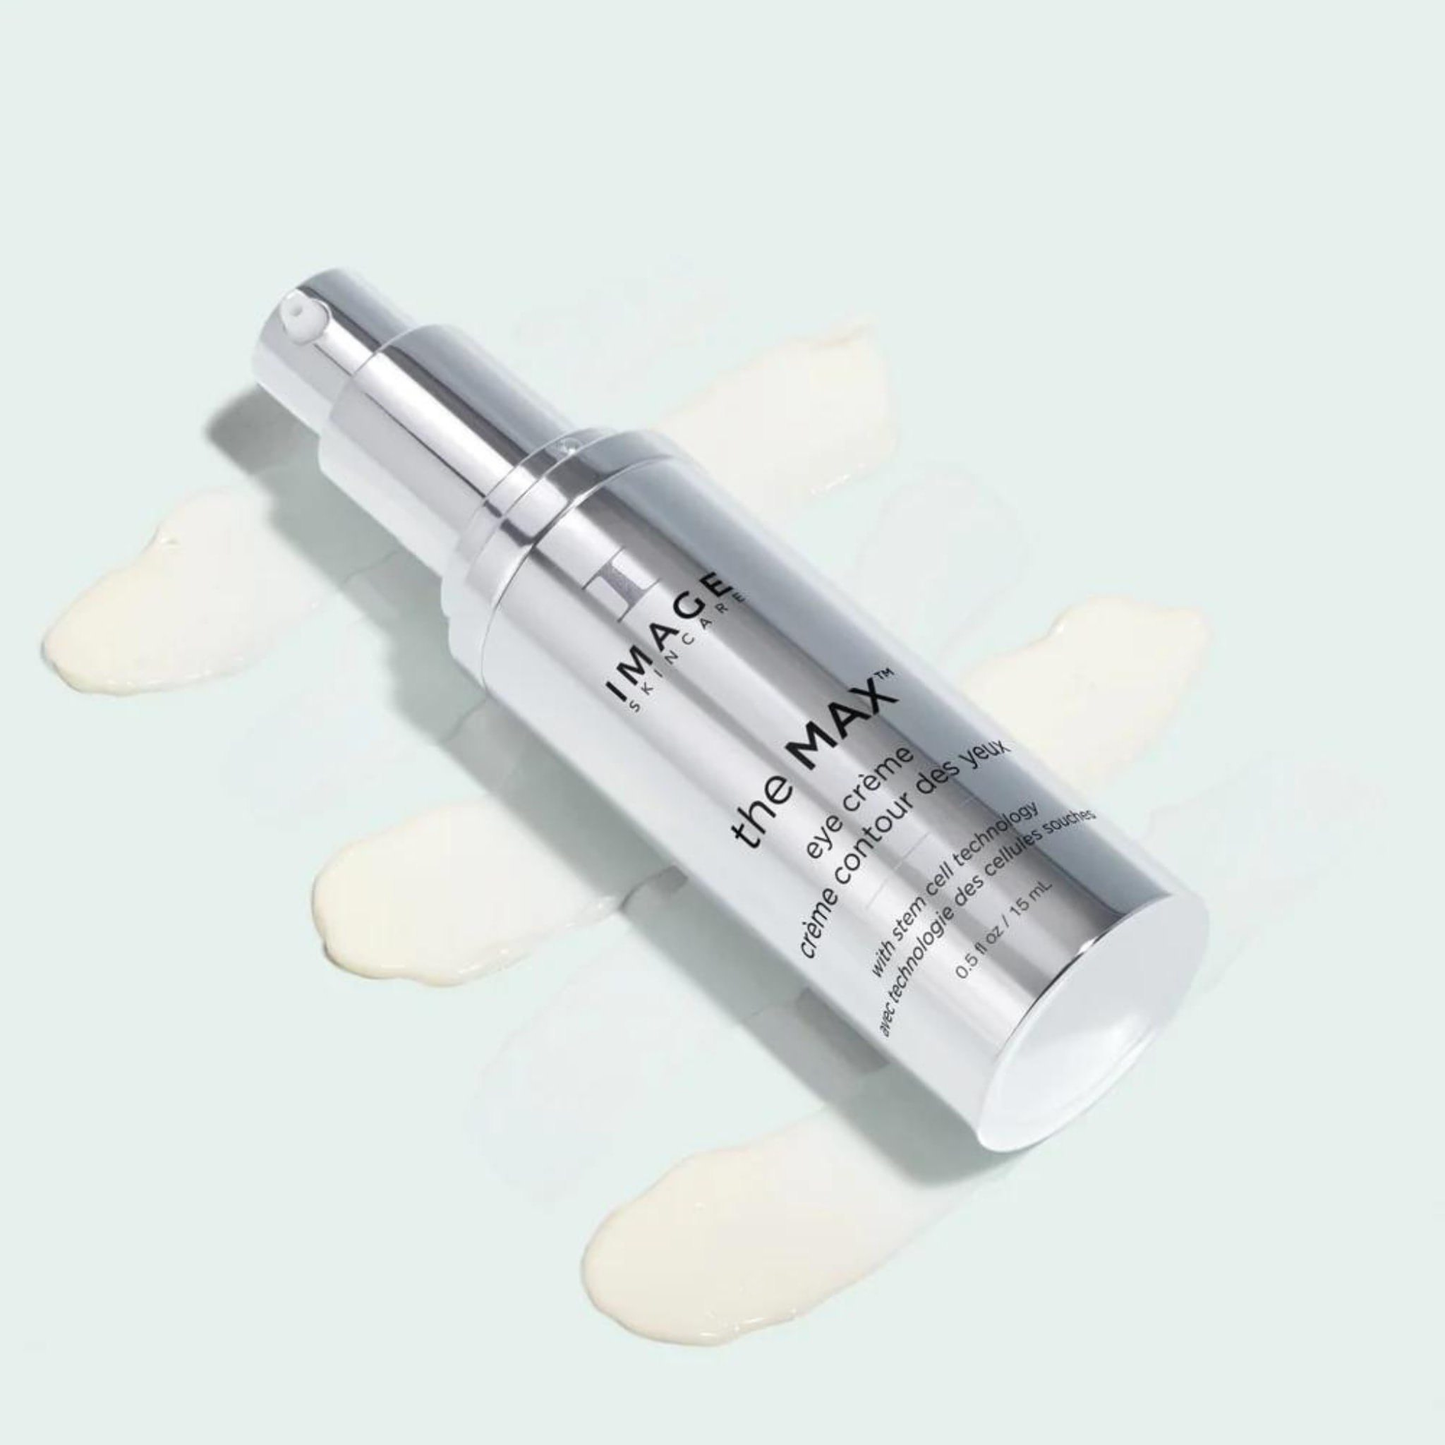 This multi-impact eye treatment reduces the appearance of fine lines, wrinkles, dark circles and puffiness. Infused with targeted peptides and plant cell extracts to help smooth the look of lines and restore a bright, well-rested appearance to tired eyes.